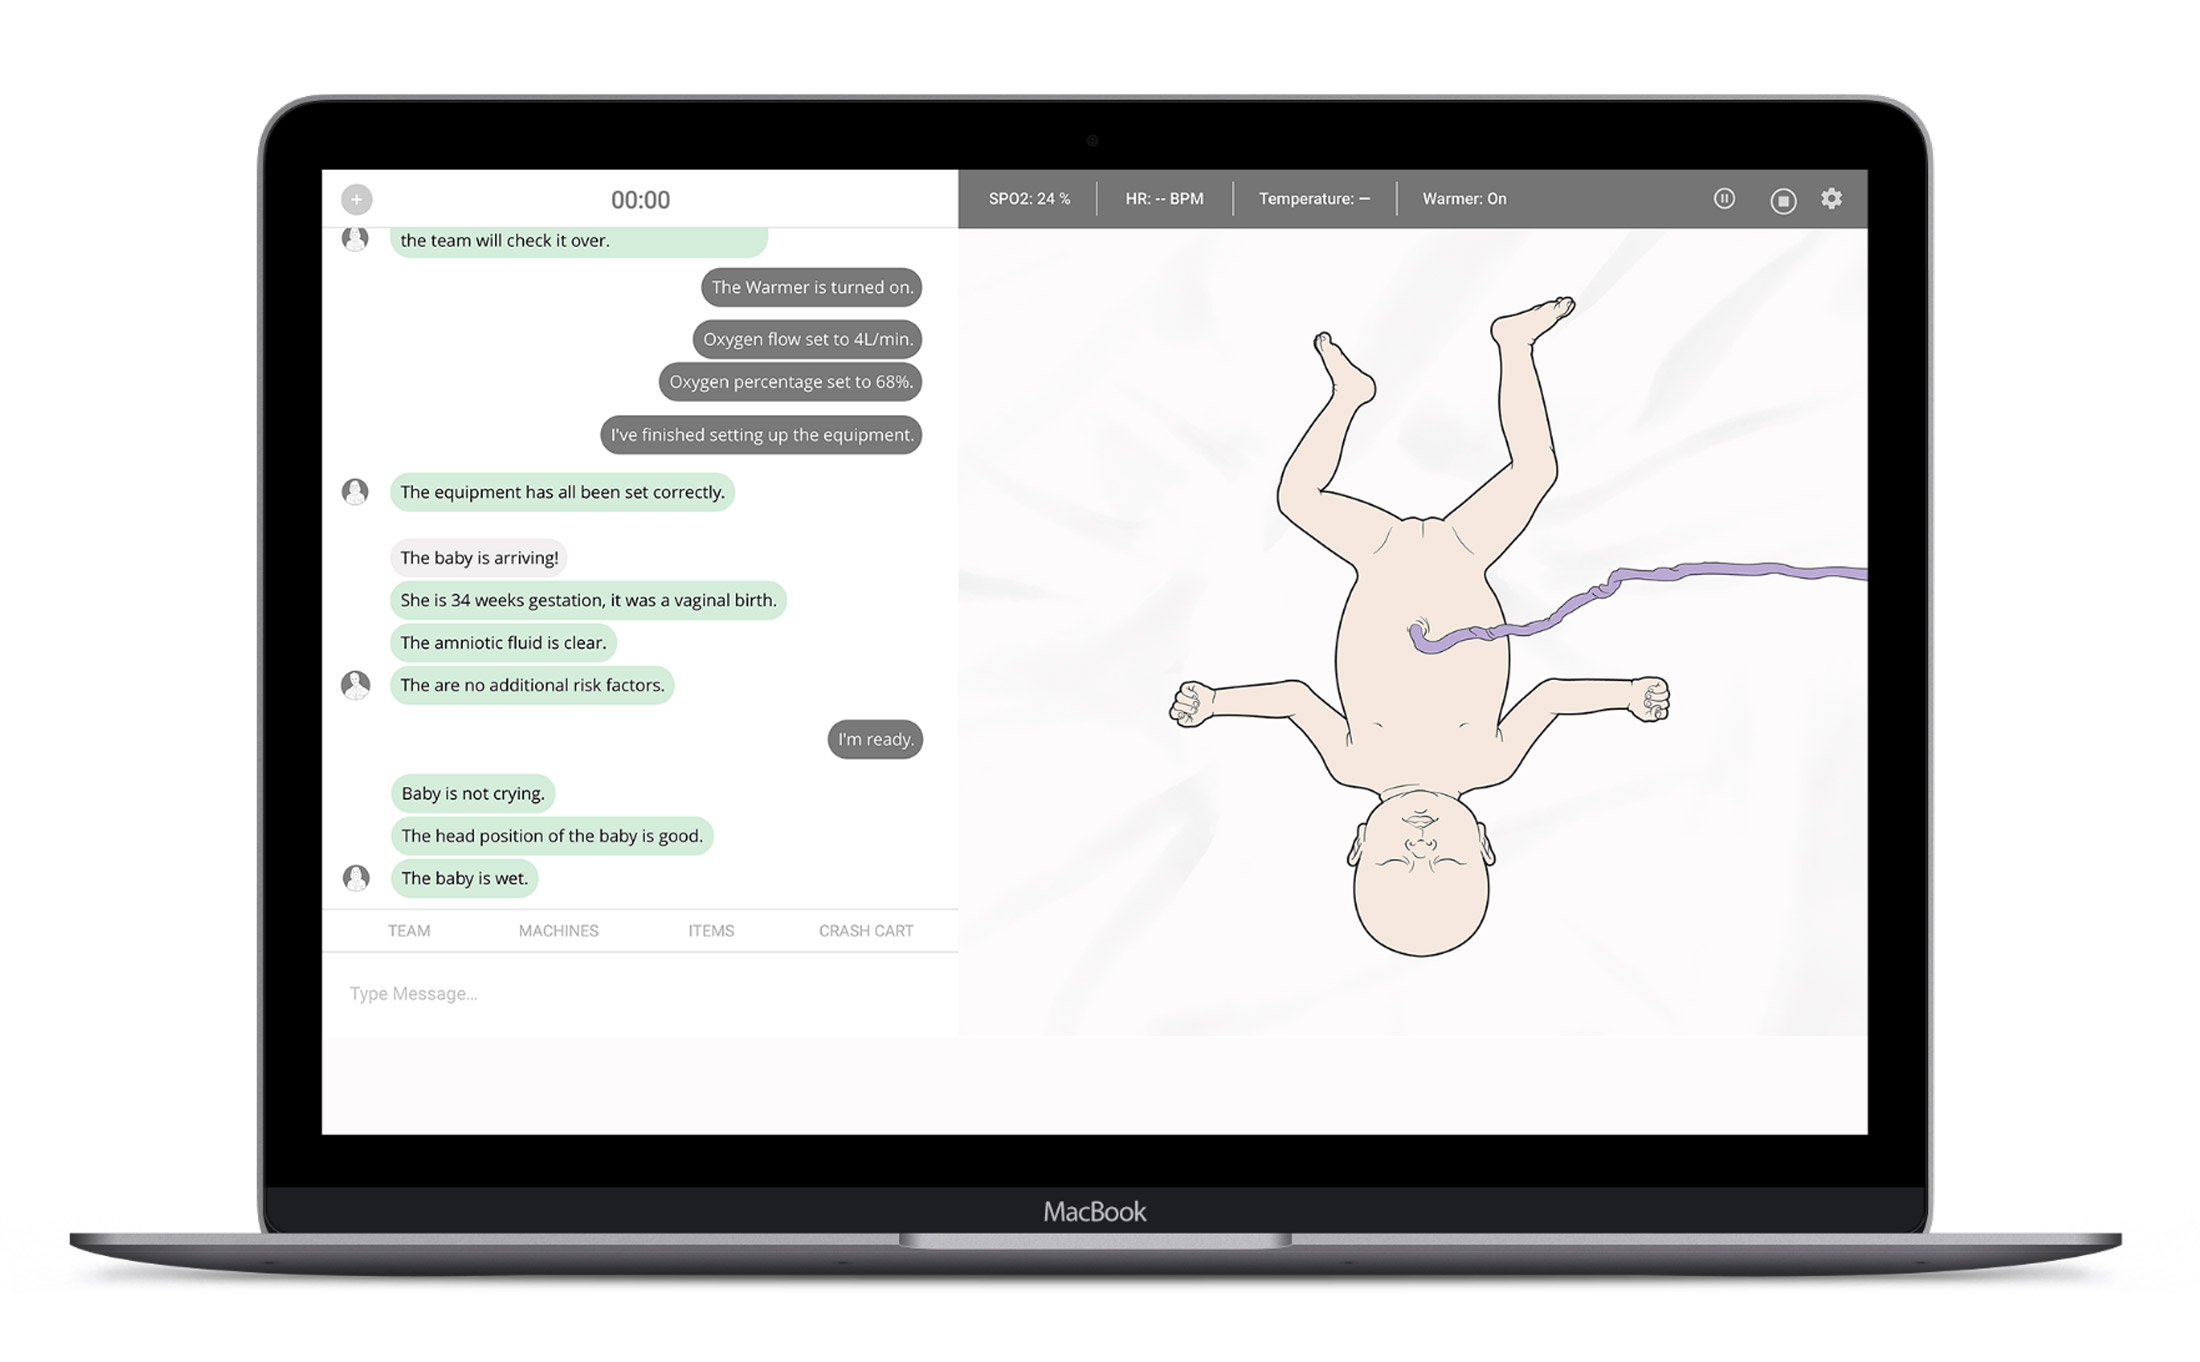 RETAIN digital simulator on a laptop screen, showing a text conversation about a birth on one side of the screen, and an illustrated baby with some medical statistics on the other